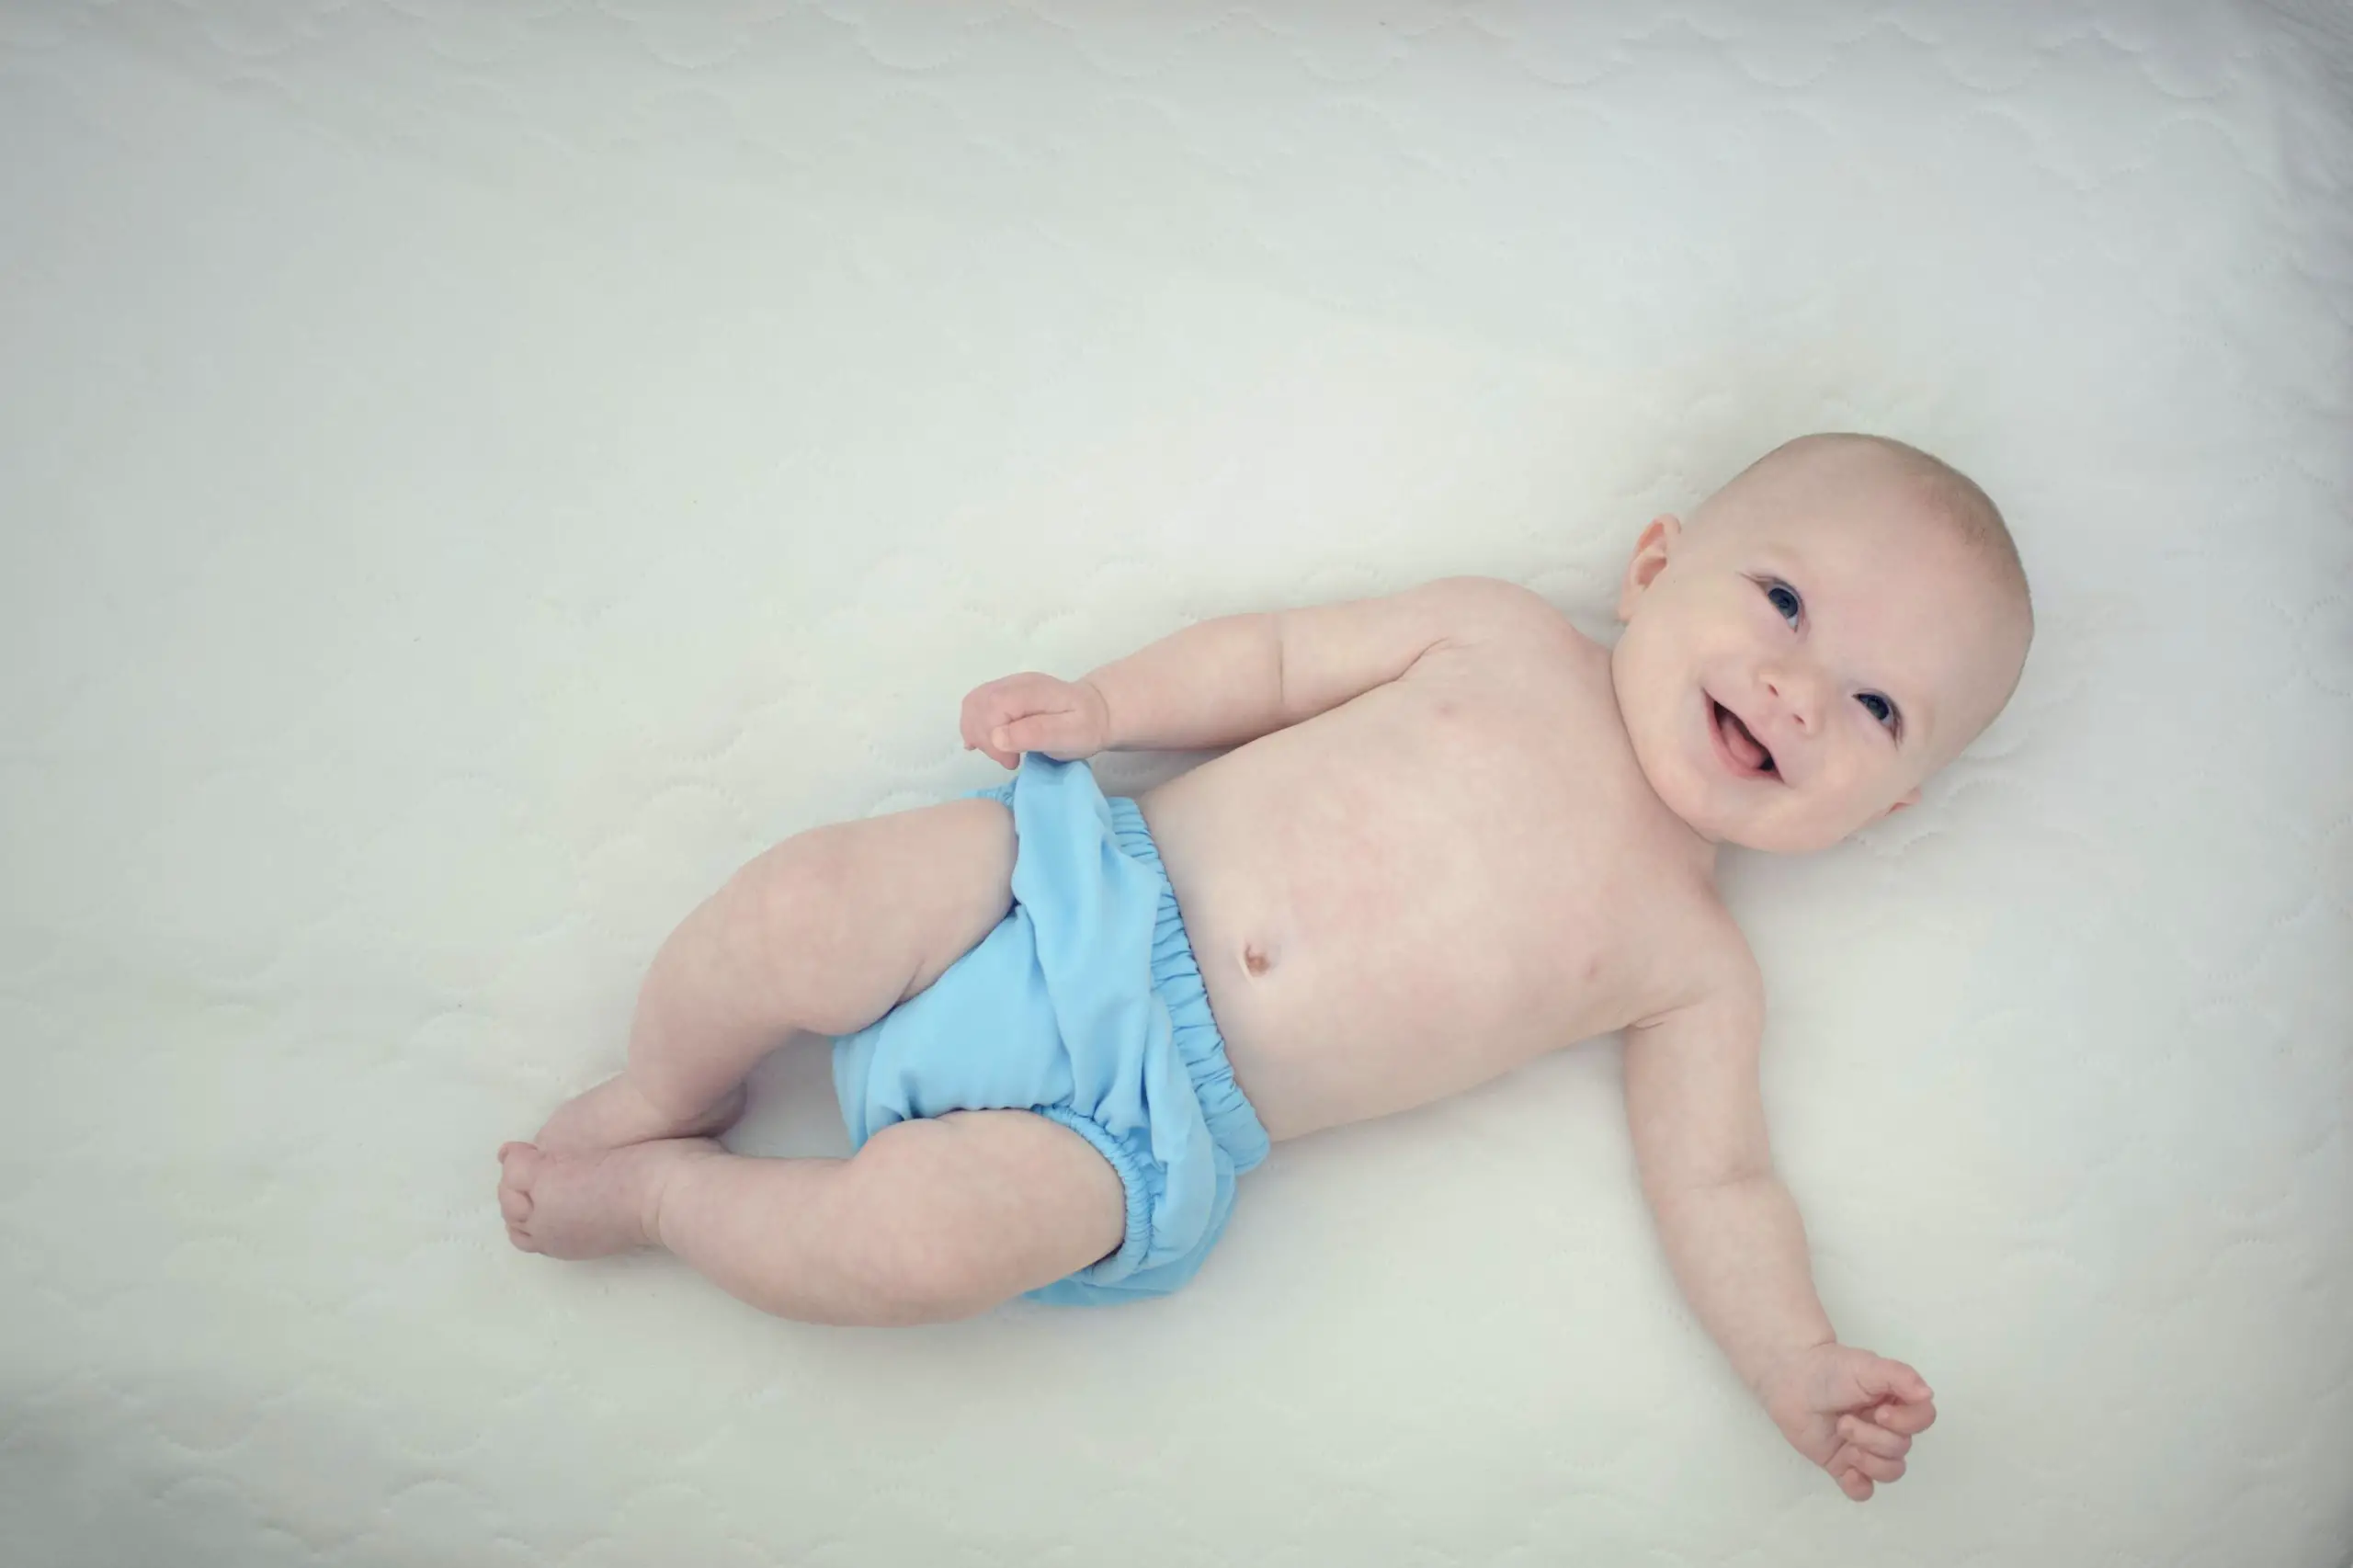 smiling baby wearing a blue cloth diaper